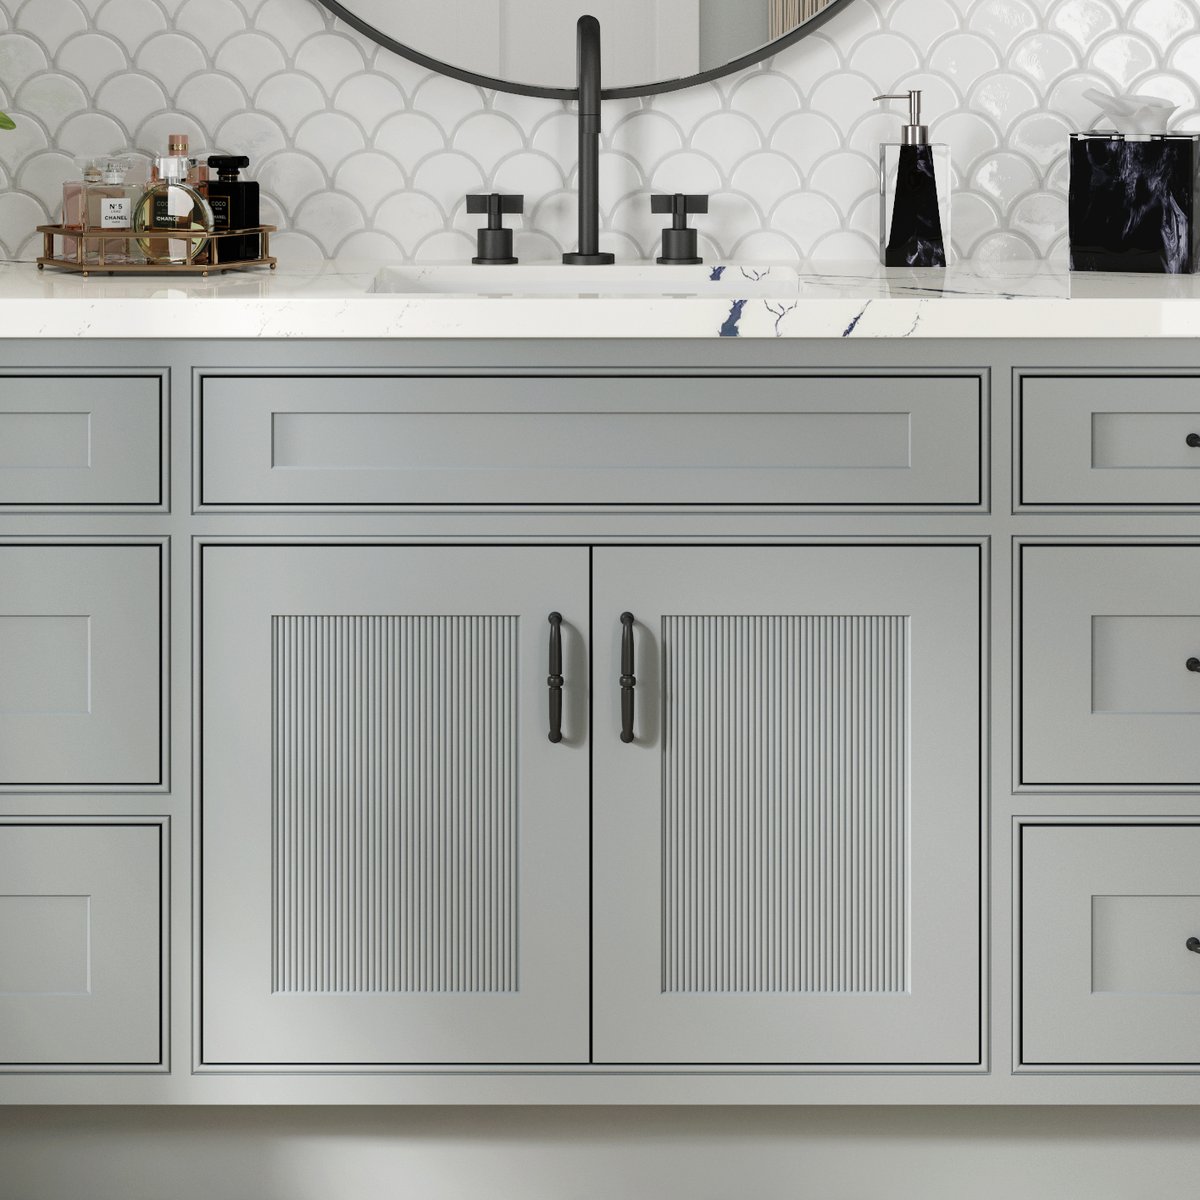 #DuraSupreme #Cabinetry is Adding #Texture with NEW #ReededPanels: Dura Supreme is keeping their product offering current and ahead of the trends with their latest product launch... Learn more!

durasupreme.com/blog/dura-supr…

#reededcabinets #reededcabinetry #cabinets #kitchencabinets